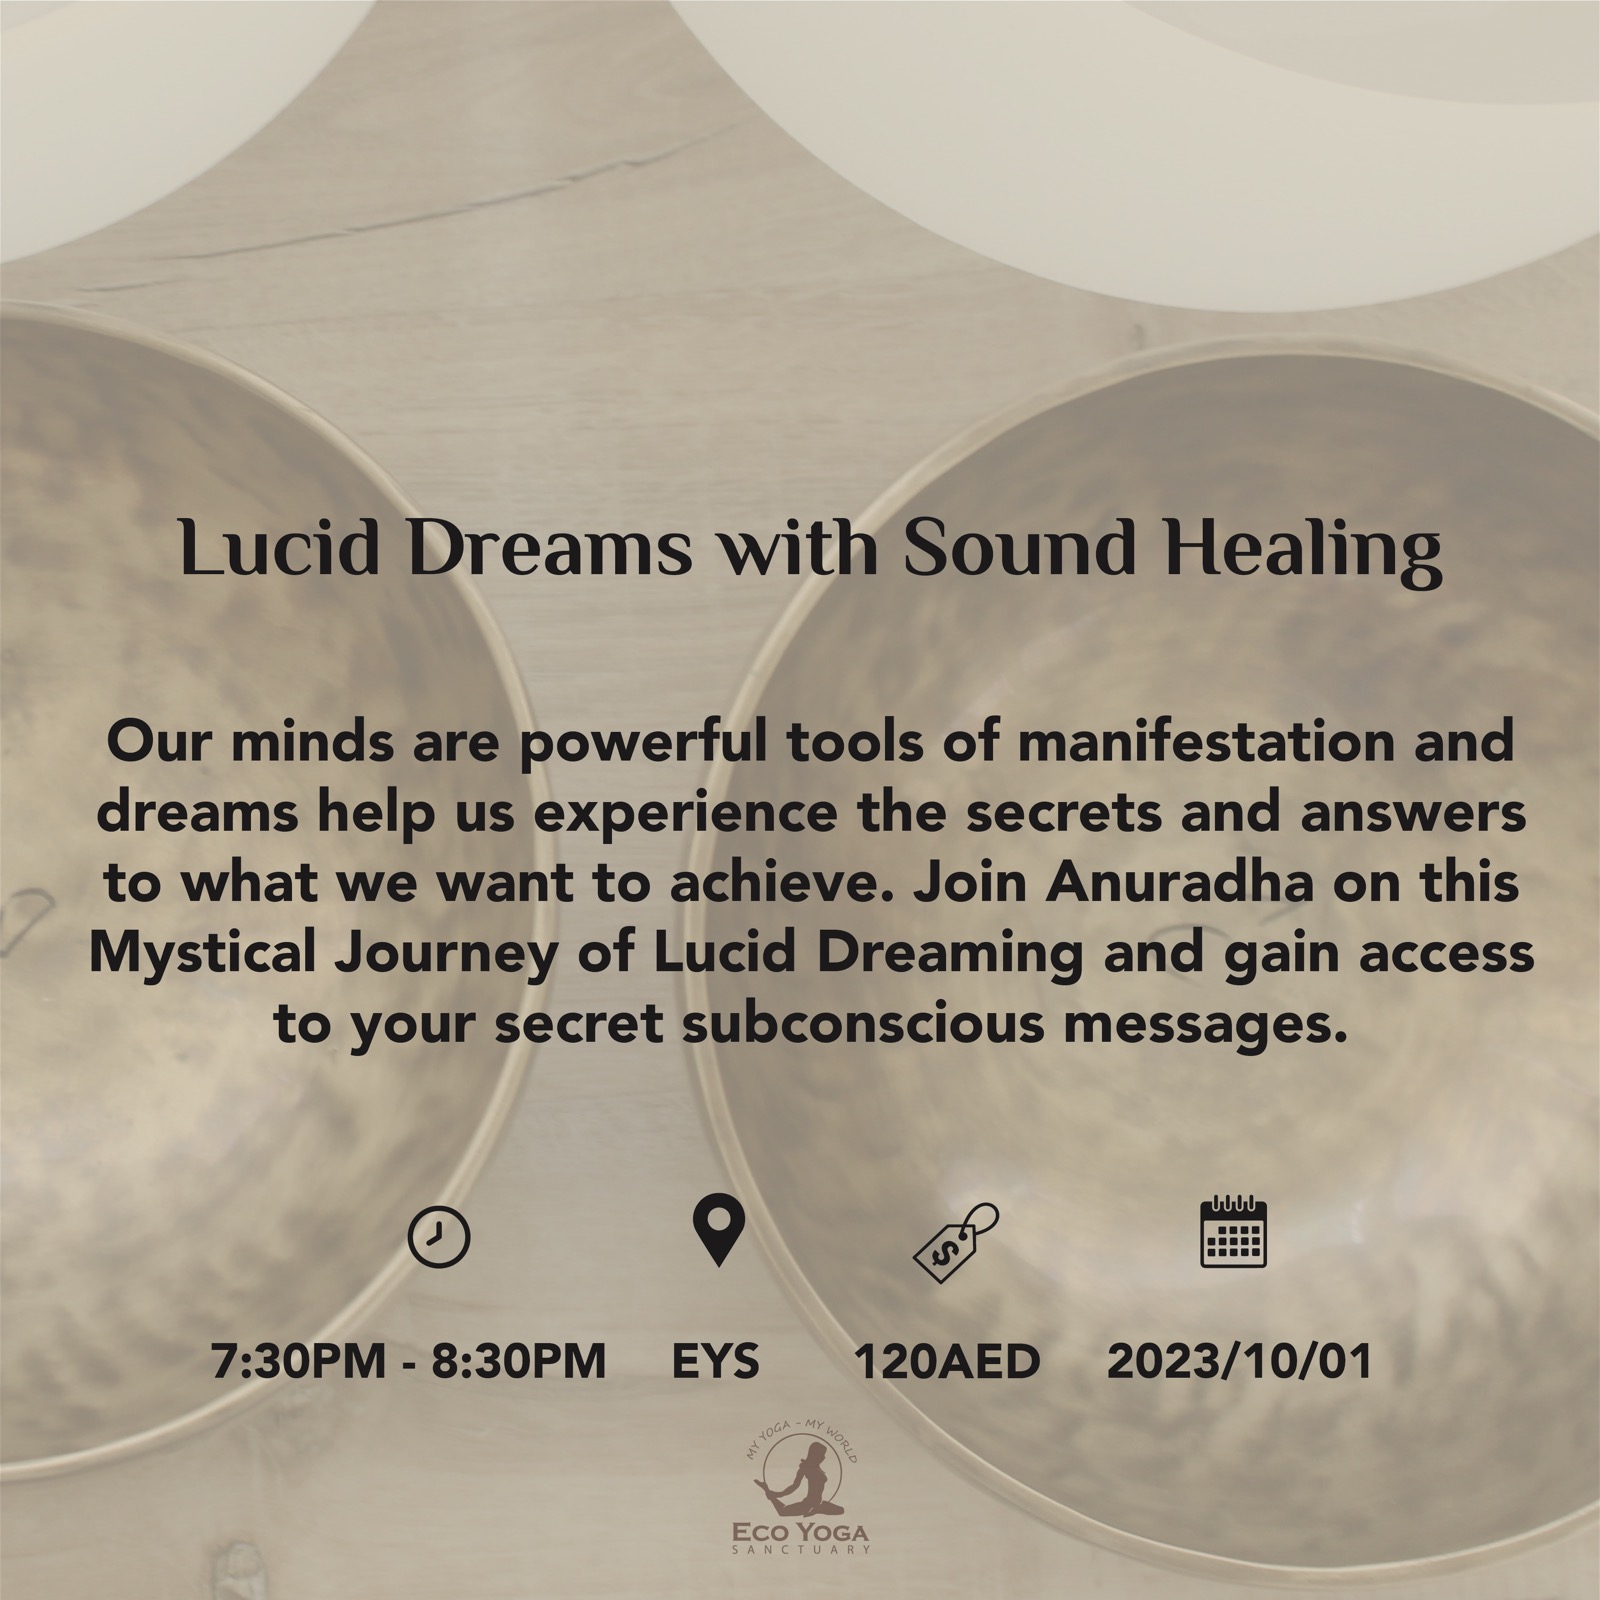 Lucid Dreams with Sound Healing